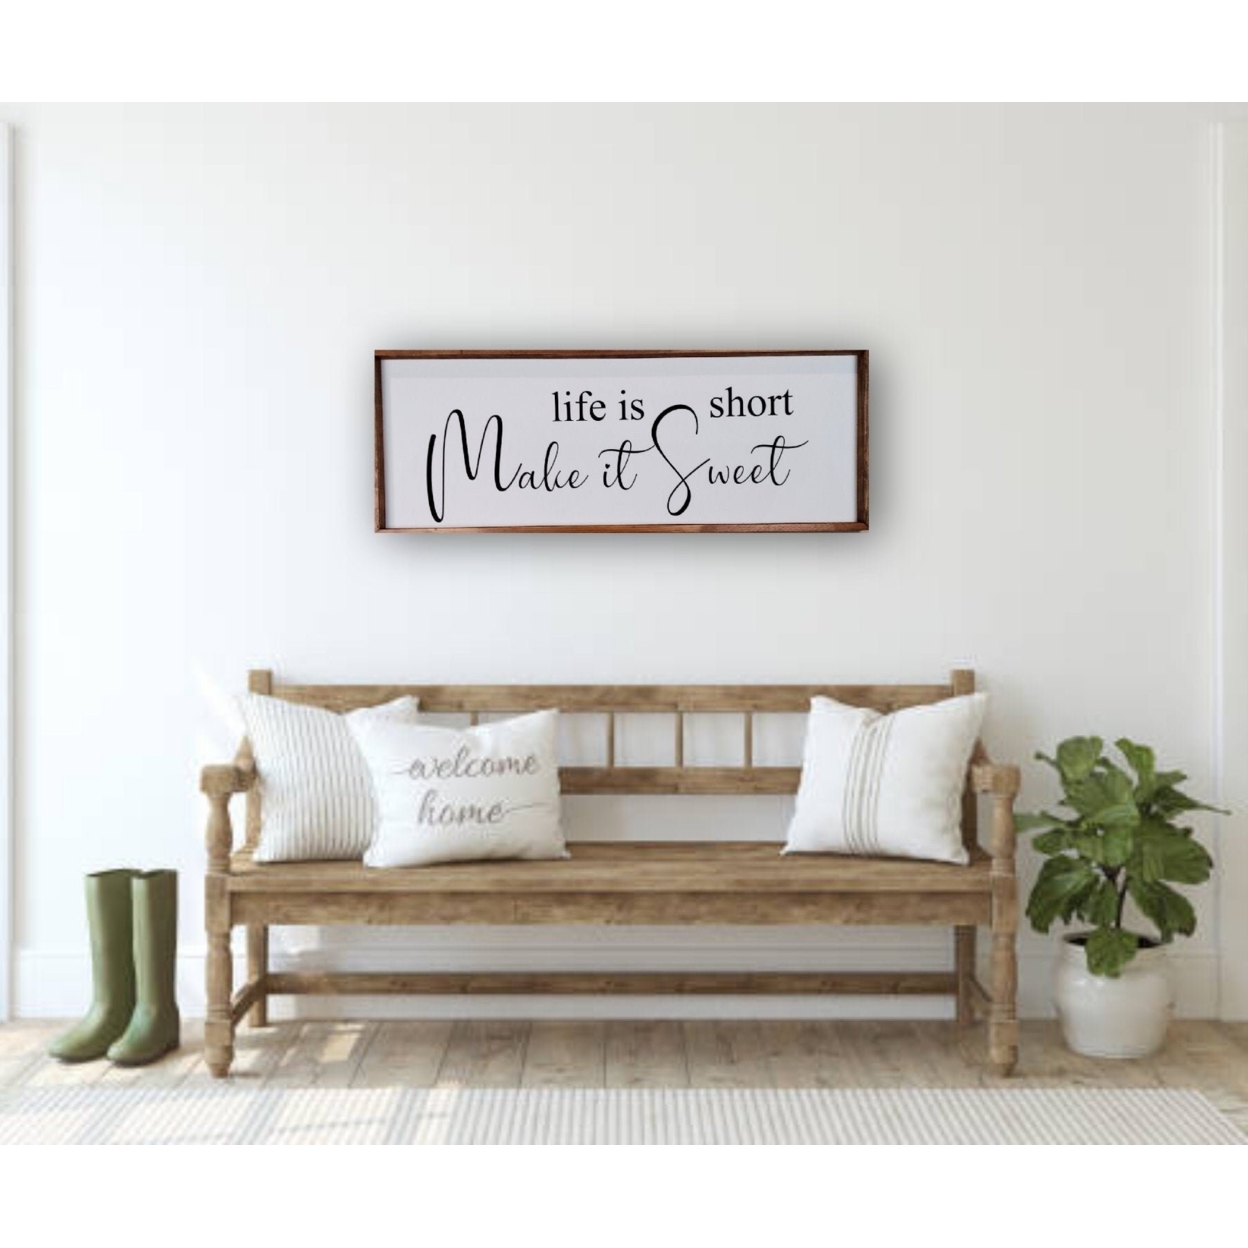 Life is Short Make it Sweet Sign - Canvas Wall Sign - Farmhouse Decor - Funny Sign - Rustic Decor - Canvas Wall Art - inspirational quote - Black